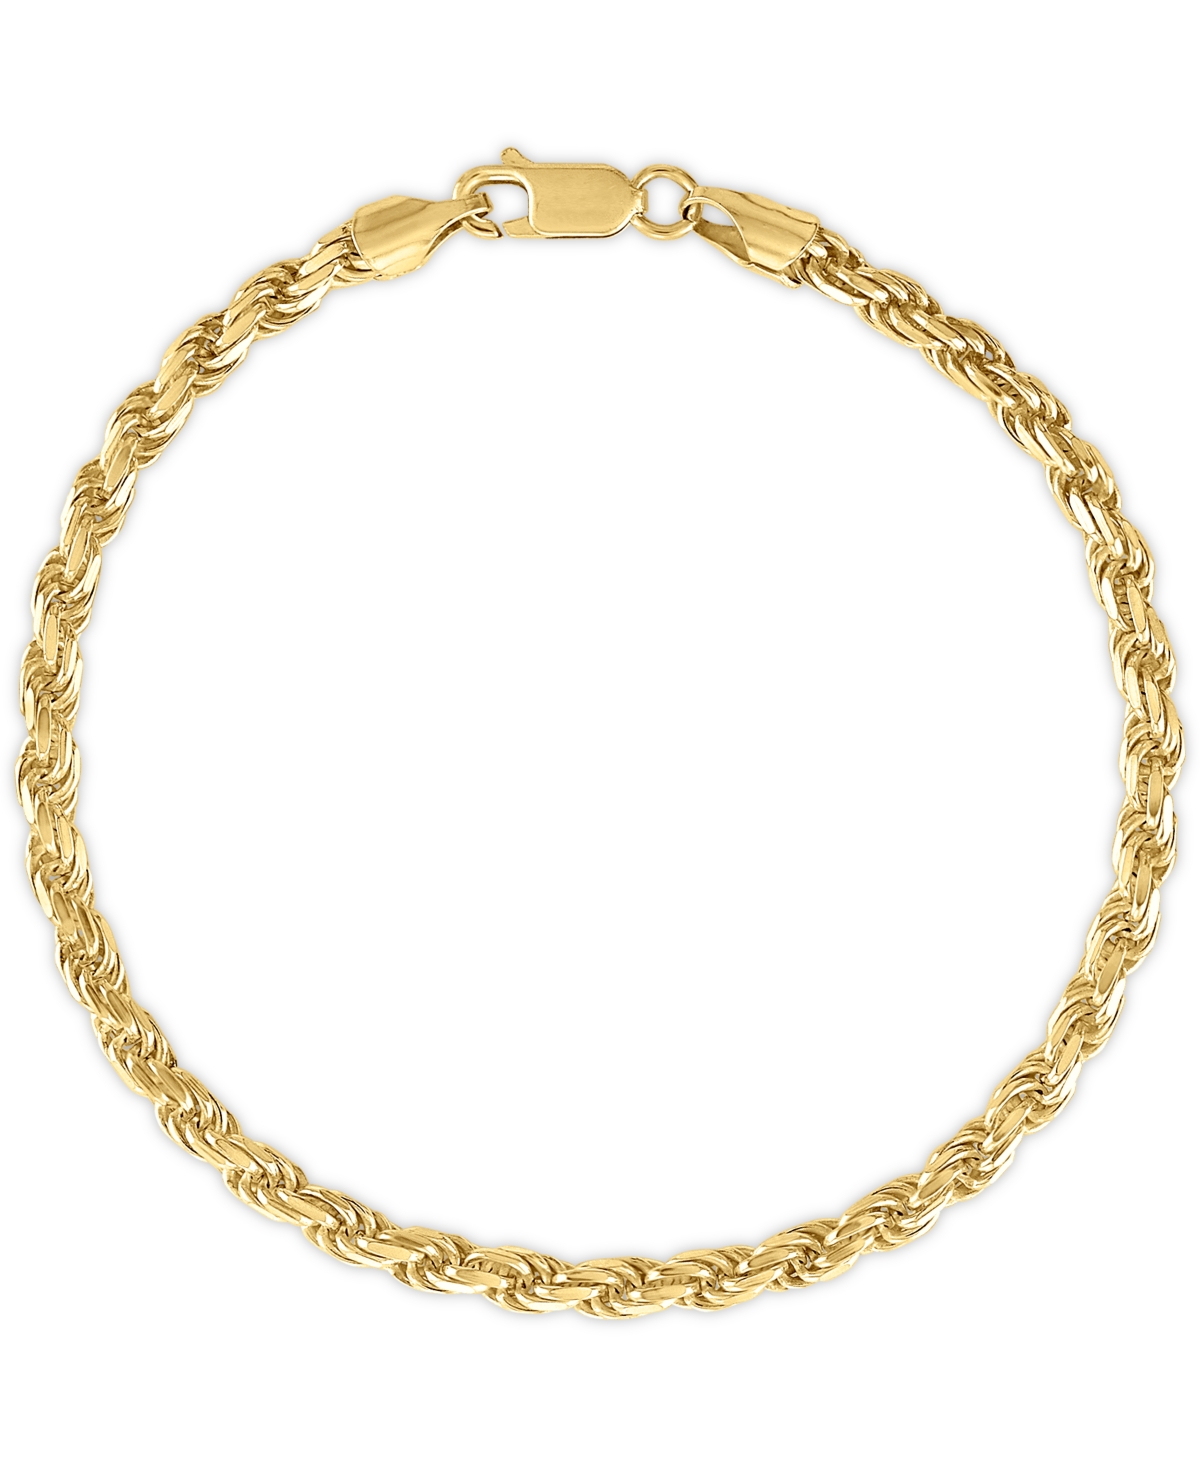 Esquire Men's Jewelry Rope Link Chain Bracelet (4mm), Created For Macy's In Gold Over Silver